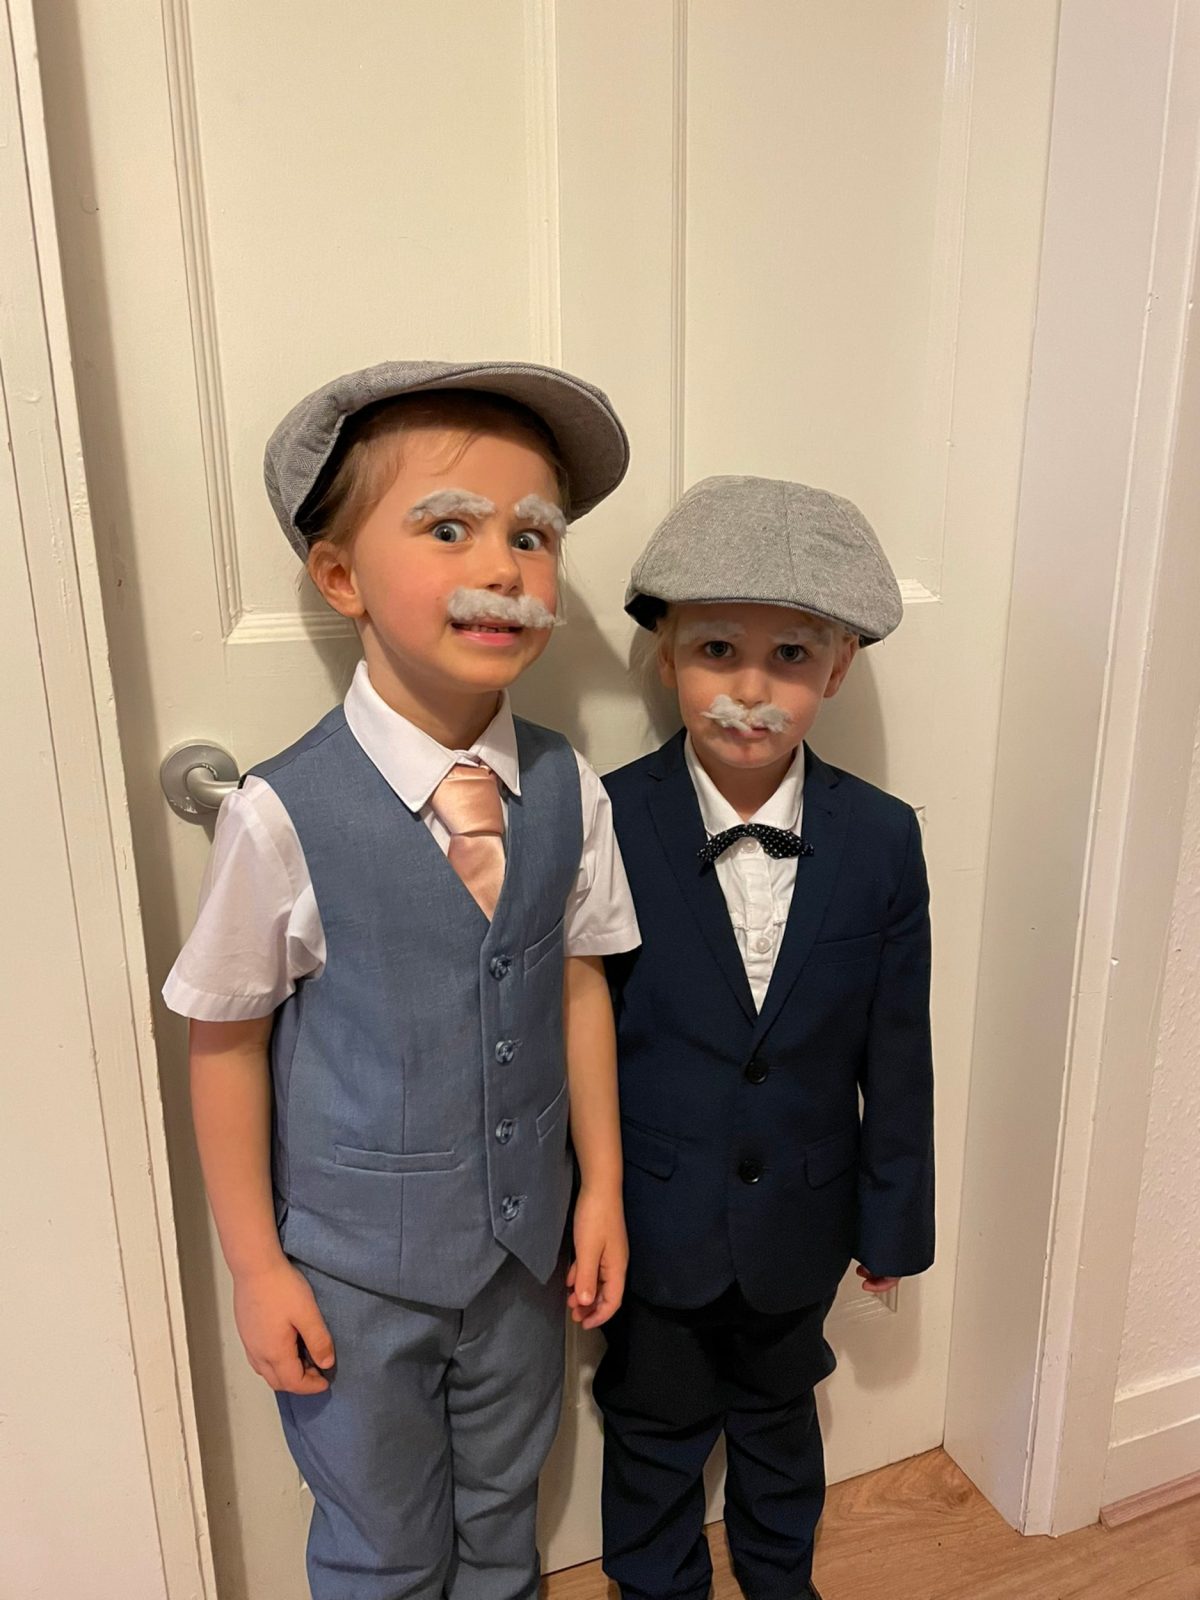 Paige and Evie dressed up as Jack and Victor.